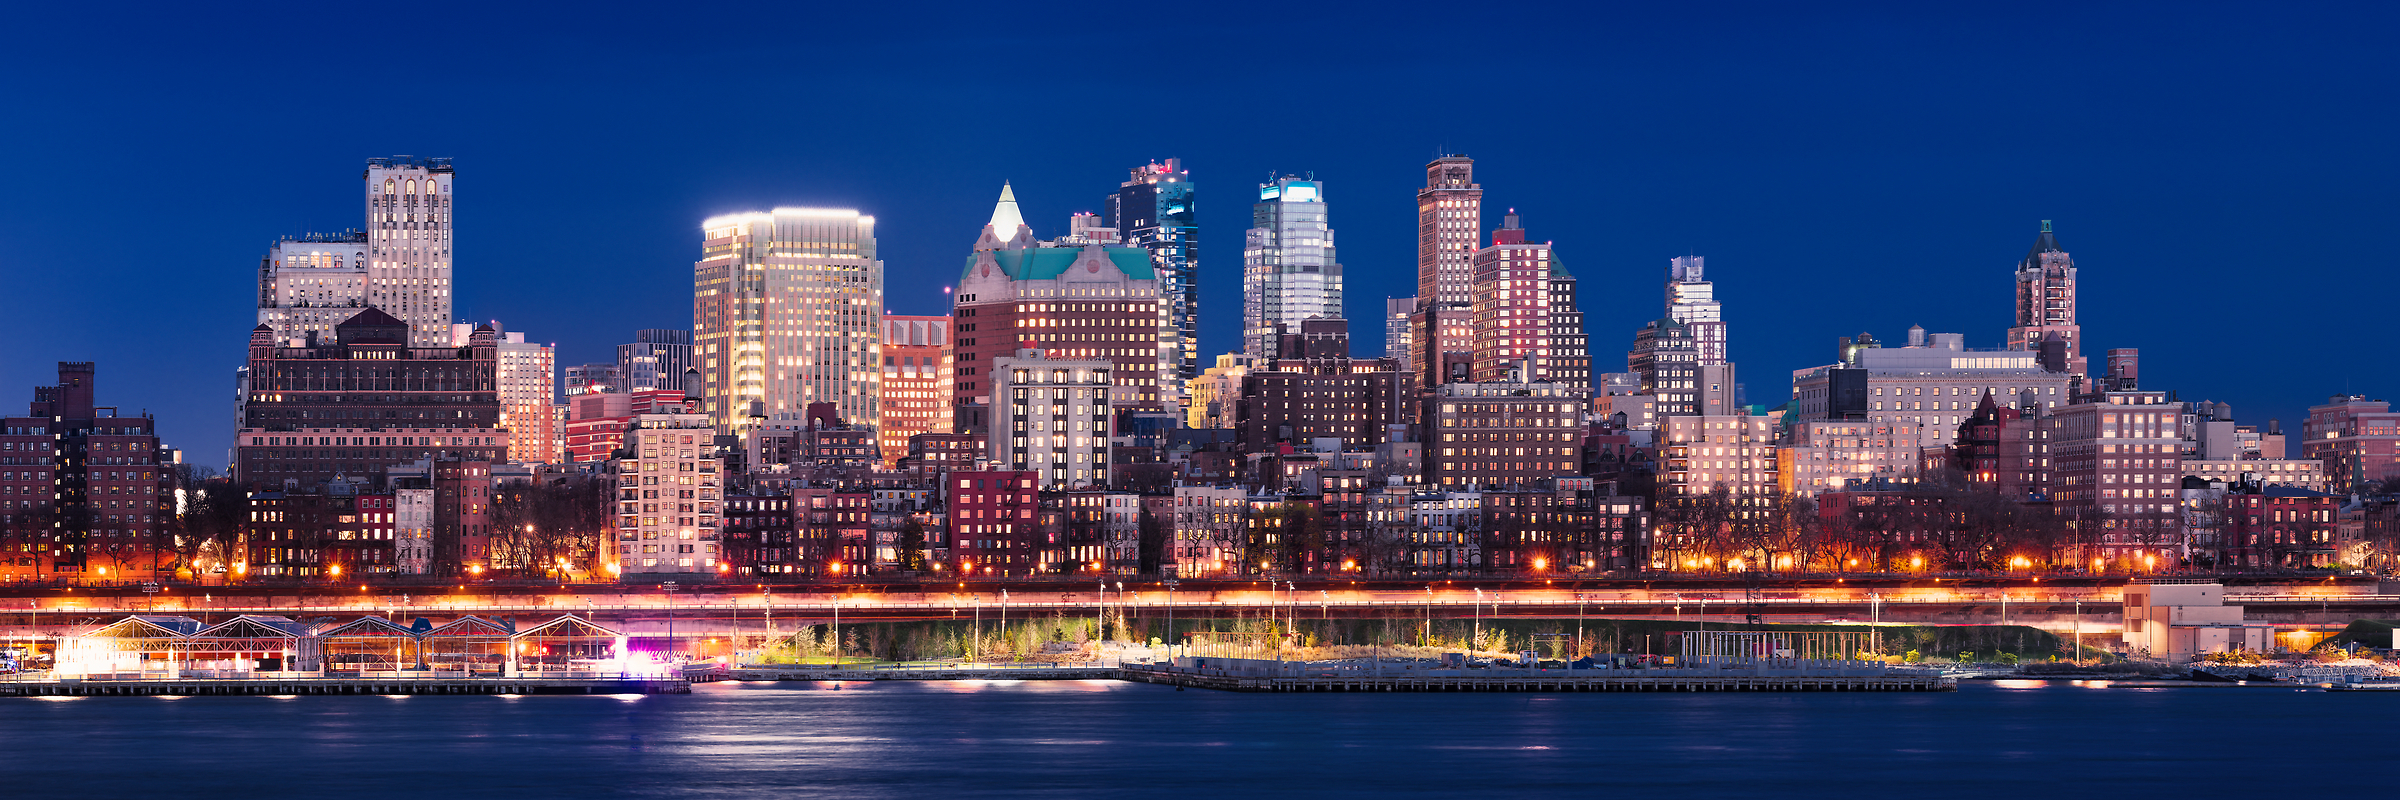 225 megapixels! A very high resolution, large-format VAST photo of the Downtown Brooklyn and Brooklyn Heights skyline at sunset dusk; fine art cityscape photograph created by Dan Piech in New York City.